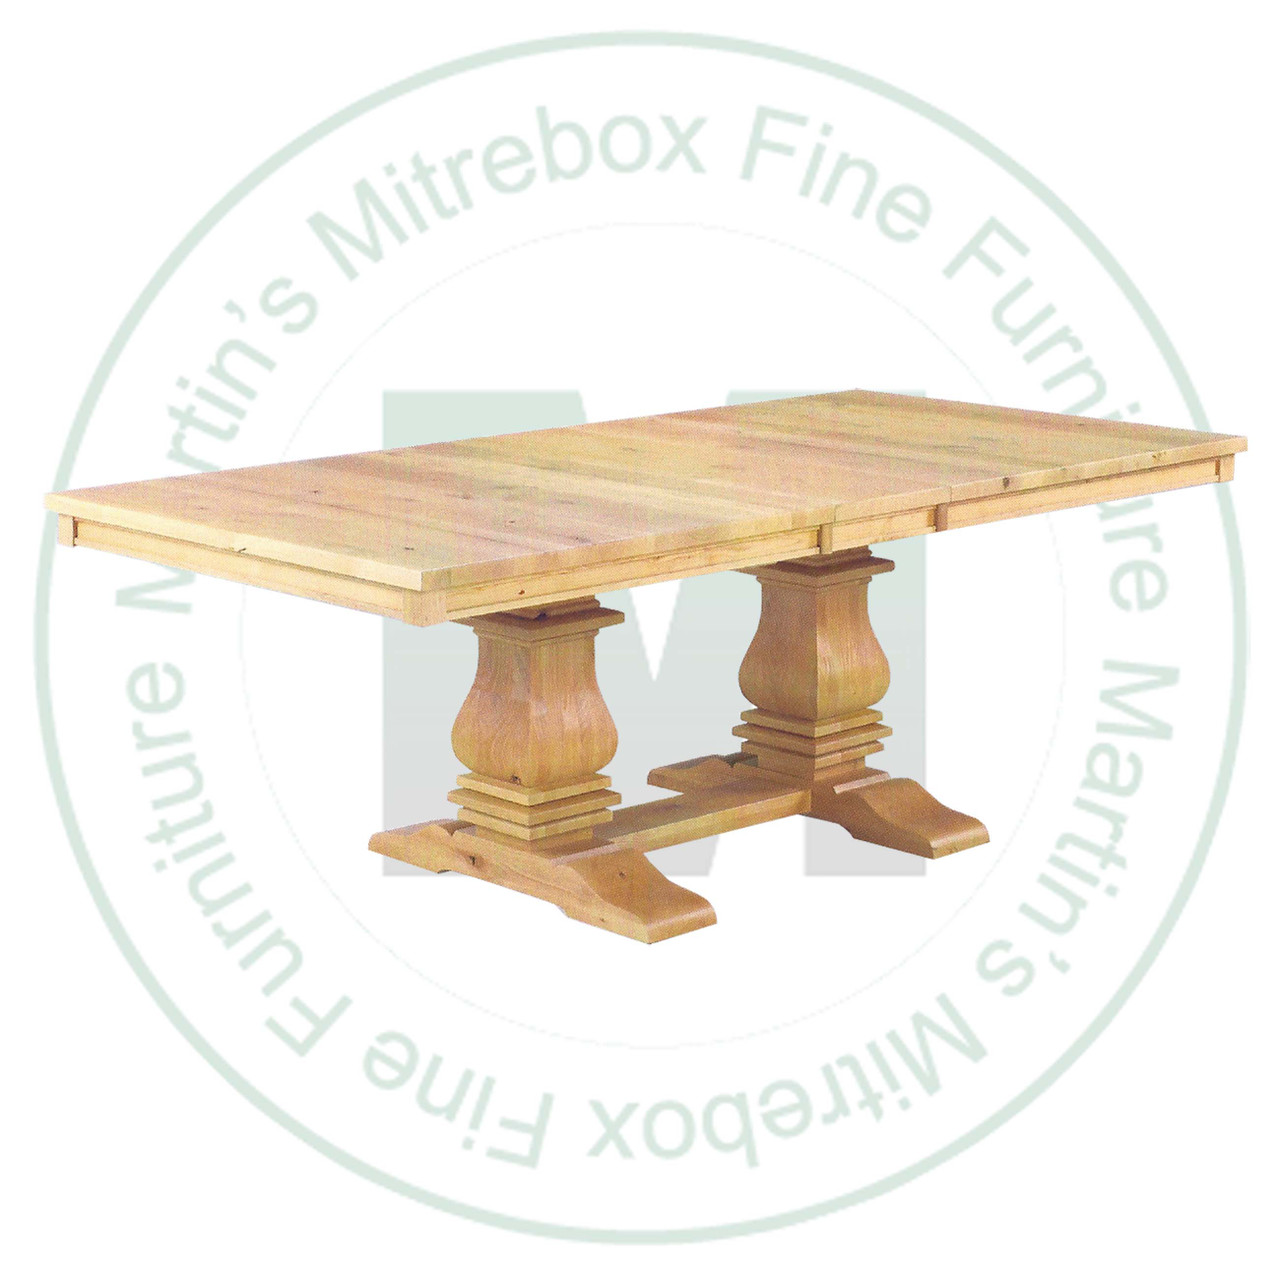 Wormy Maple Mediterranean Solid Top Pedestal Table 48''D x 120''W x 30''H. Table Has 1.25'' Thick Top